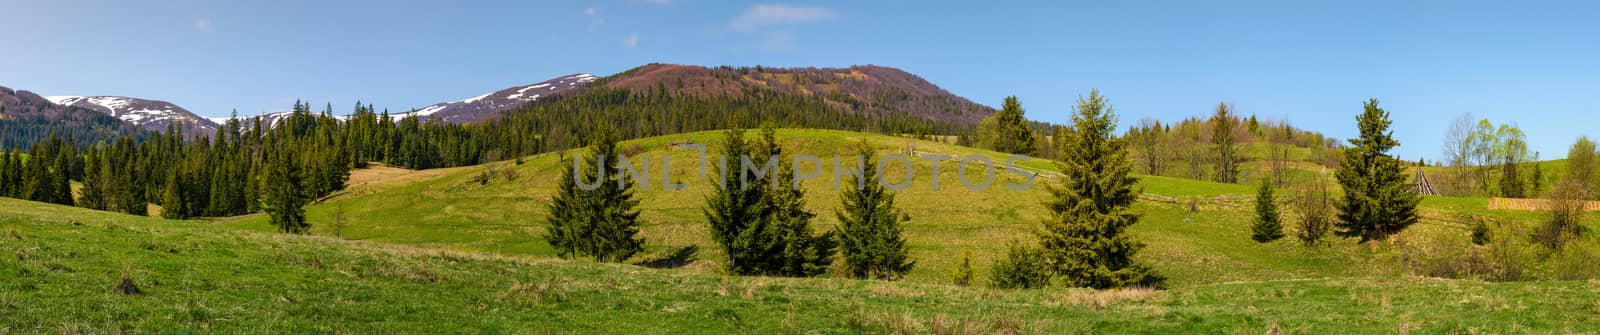 panorama of mountainous landscape in springtime. lovely scenery with spruce forest on grassy slopes. mountain ridge with snowy tops in the distance